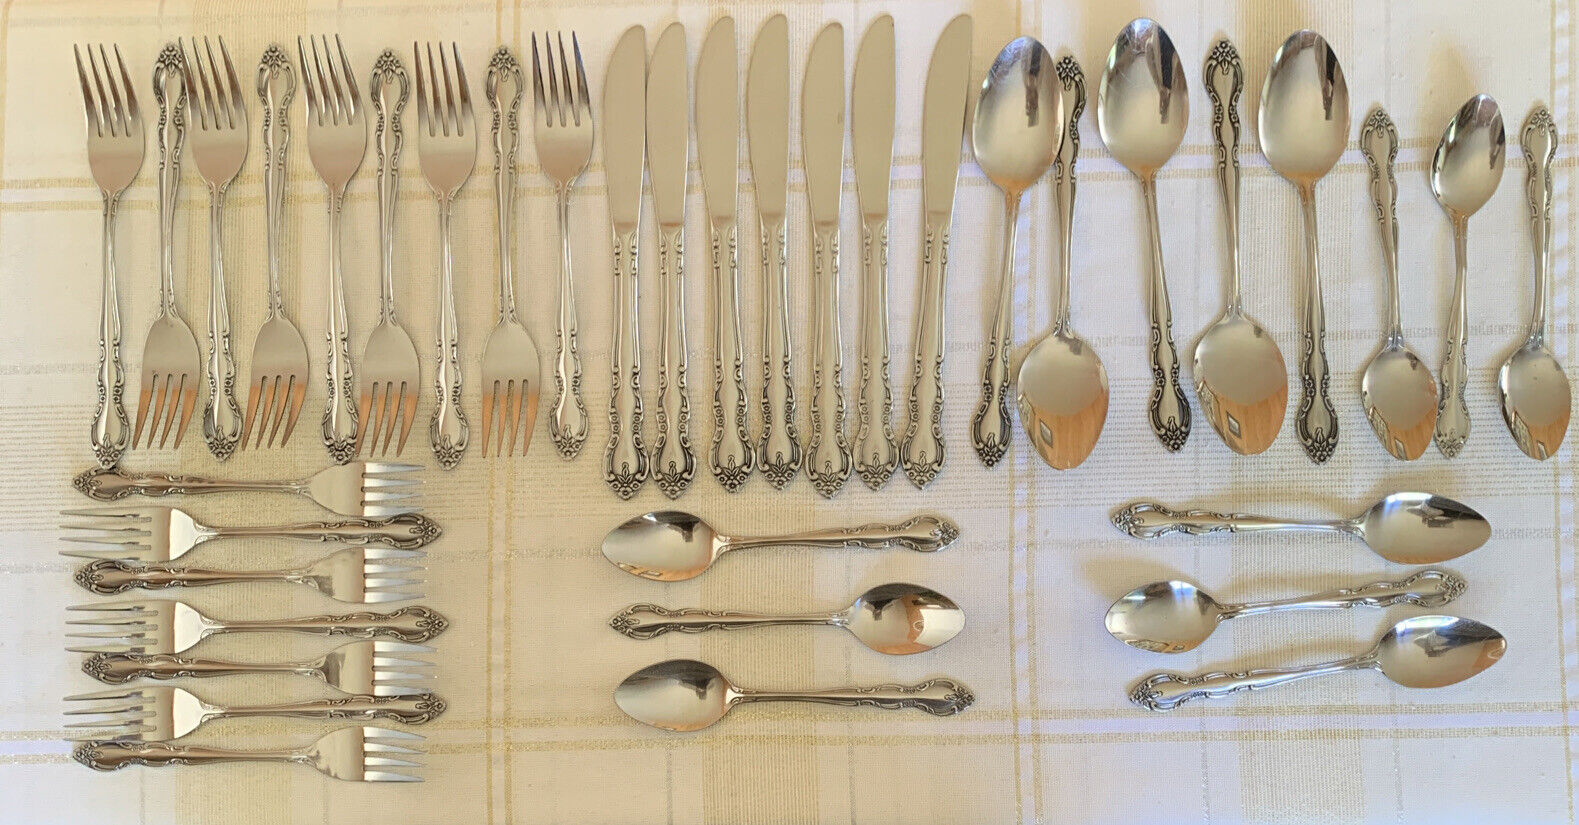 FLEURETTE Imperial Intl IIC Inox Flatware 37 Pcs IMIFLE Stainless Disc Floral